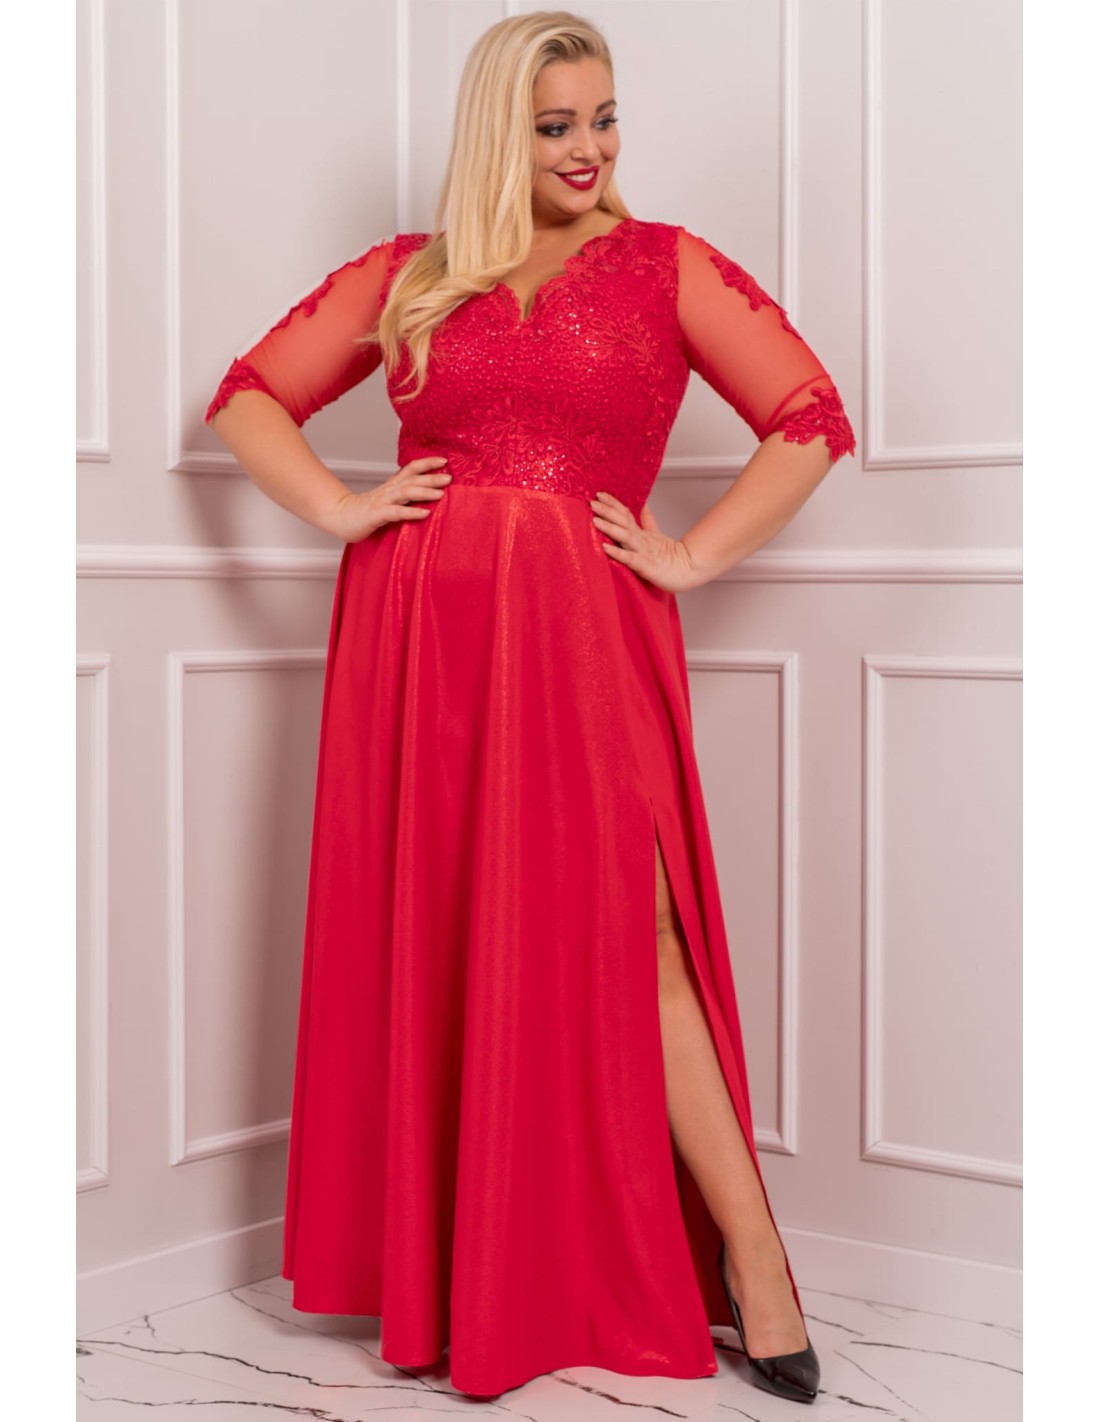 Curvy Formal Dress with 3/4 Sleeves with Elegant Lace and Slit - Coral